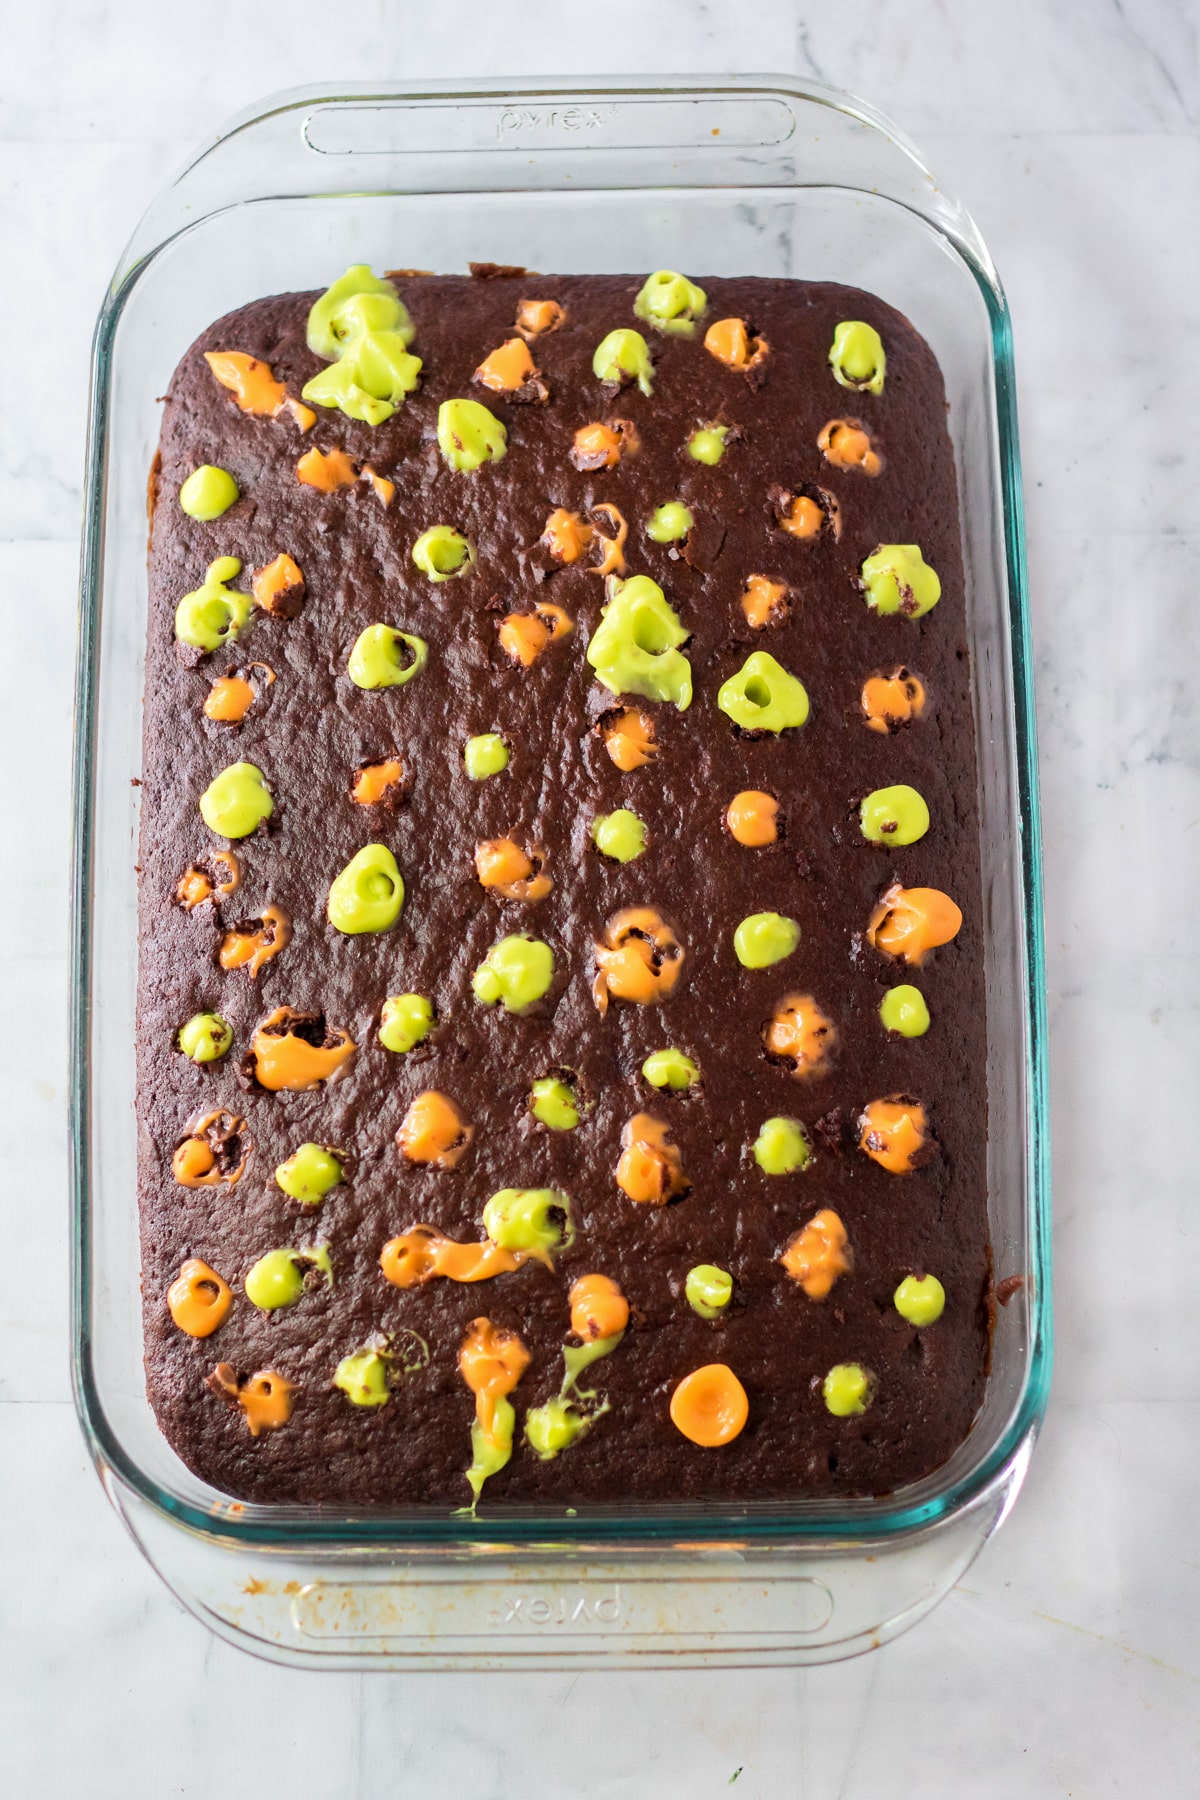 Chocolate cake in a glass pan with holes filled with green and orange pudding from above.